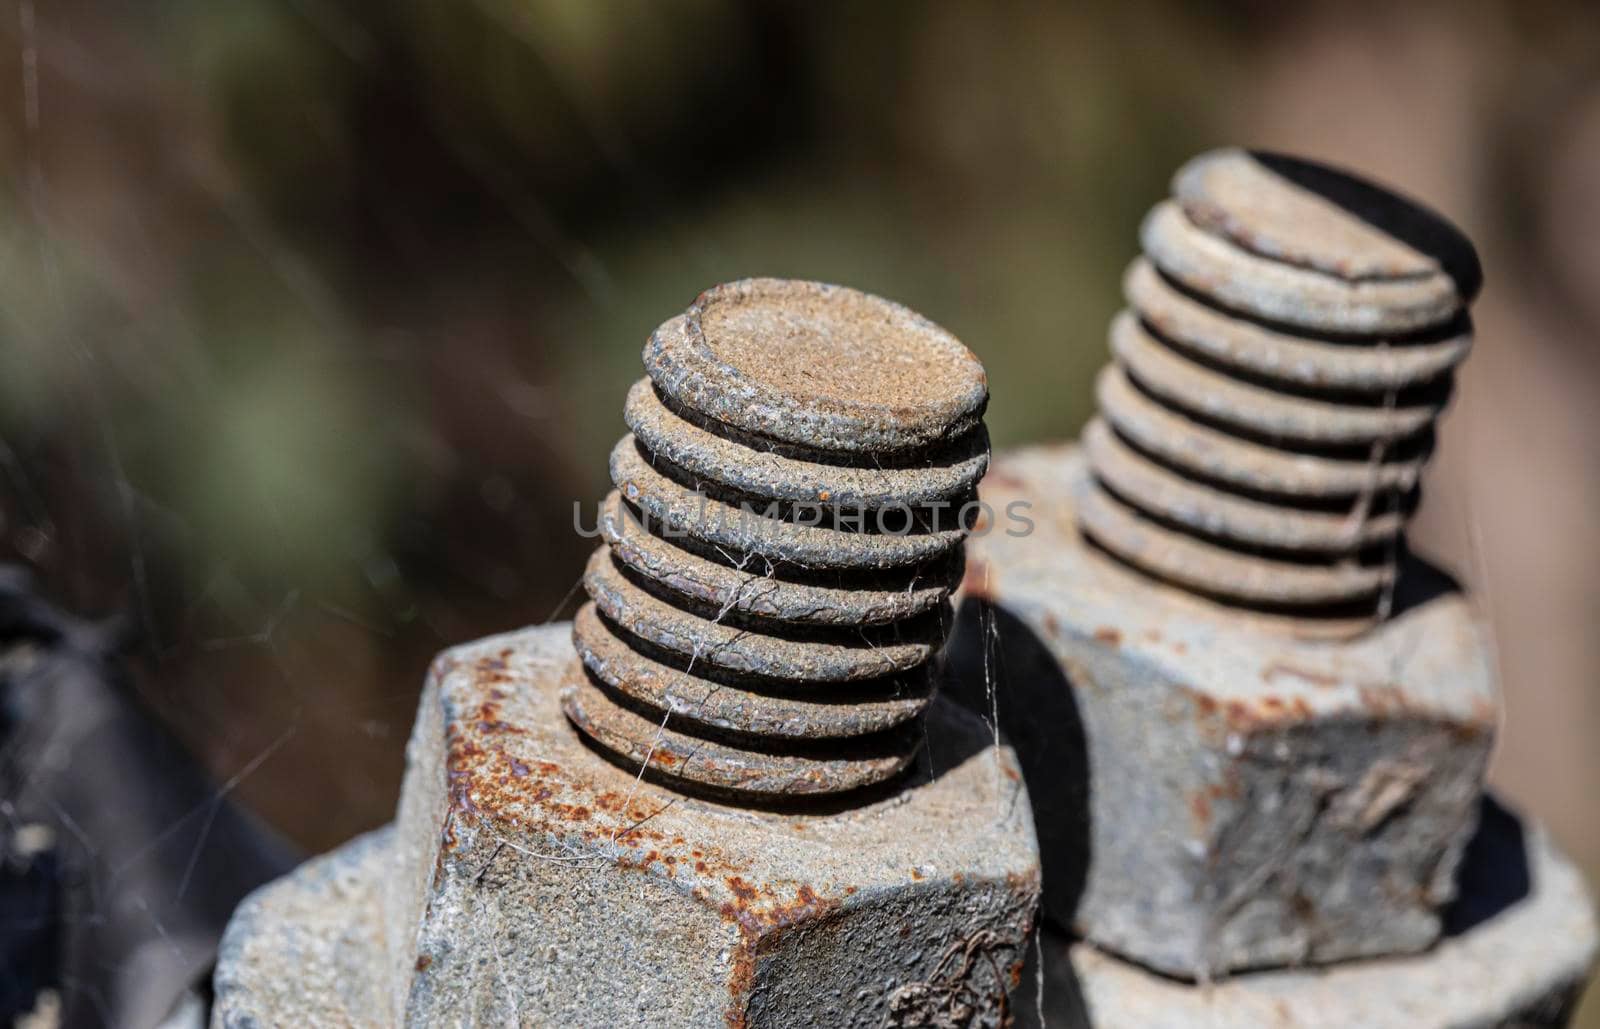 Photograph of the thread of a rusty galvanised bolt by WittkePhotos